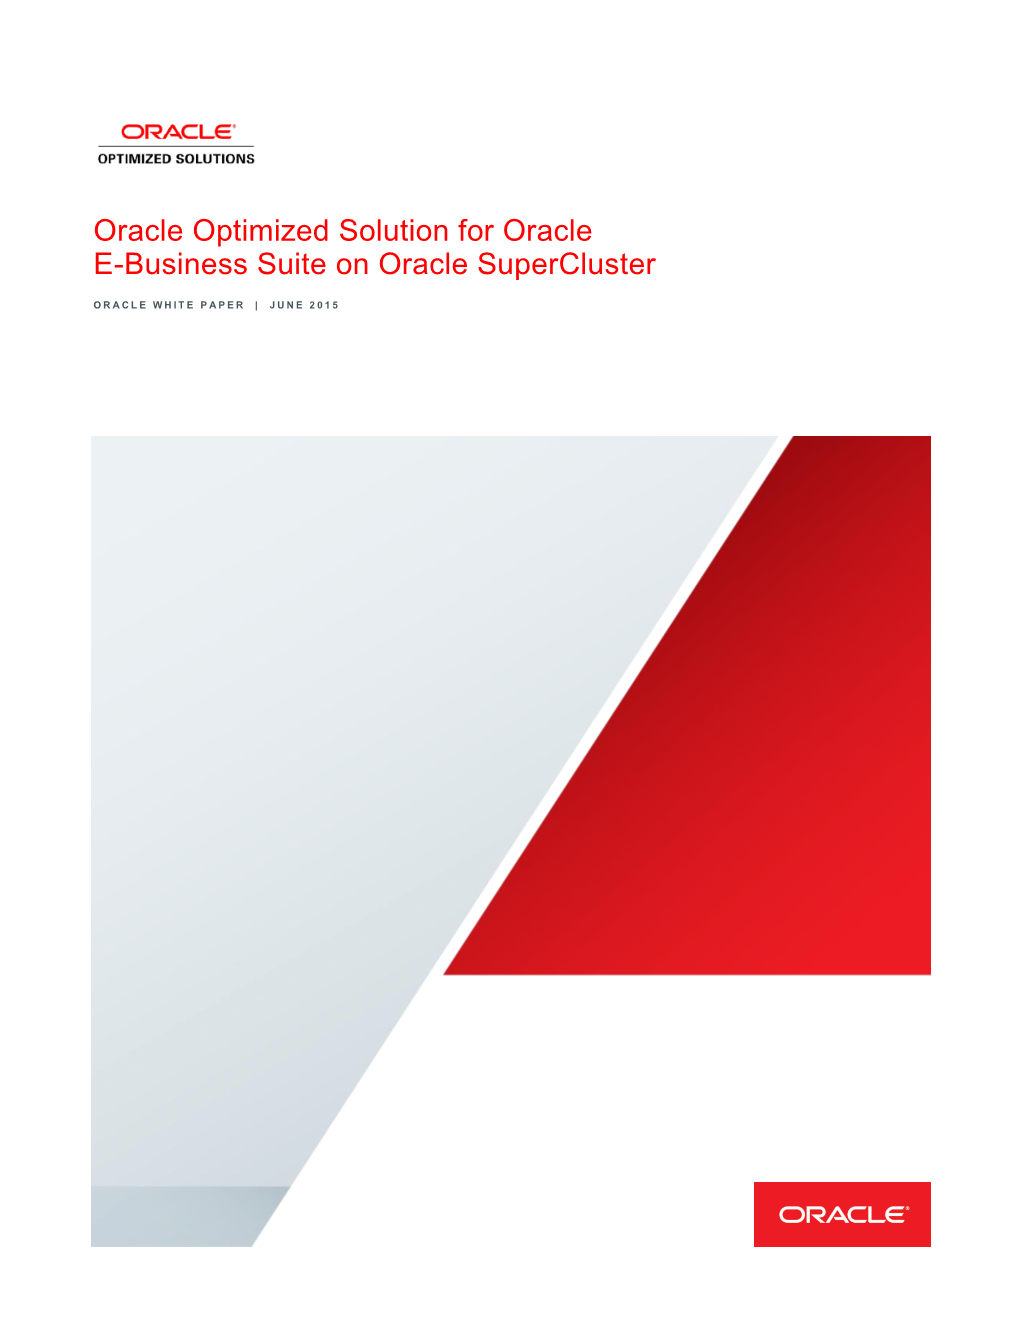 Oracle Optimized Solution for Oracle E-Business Suite on Oracle Supercluster